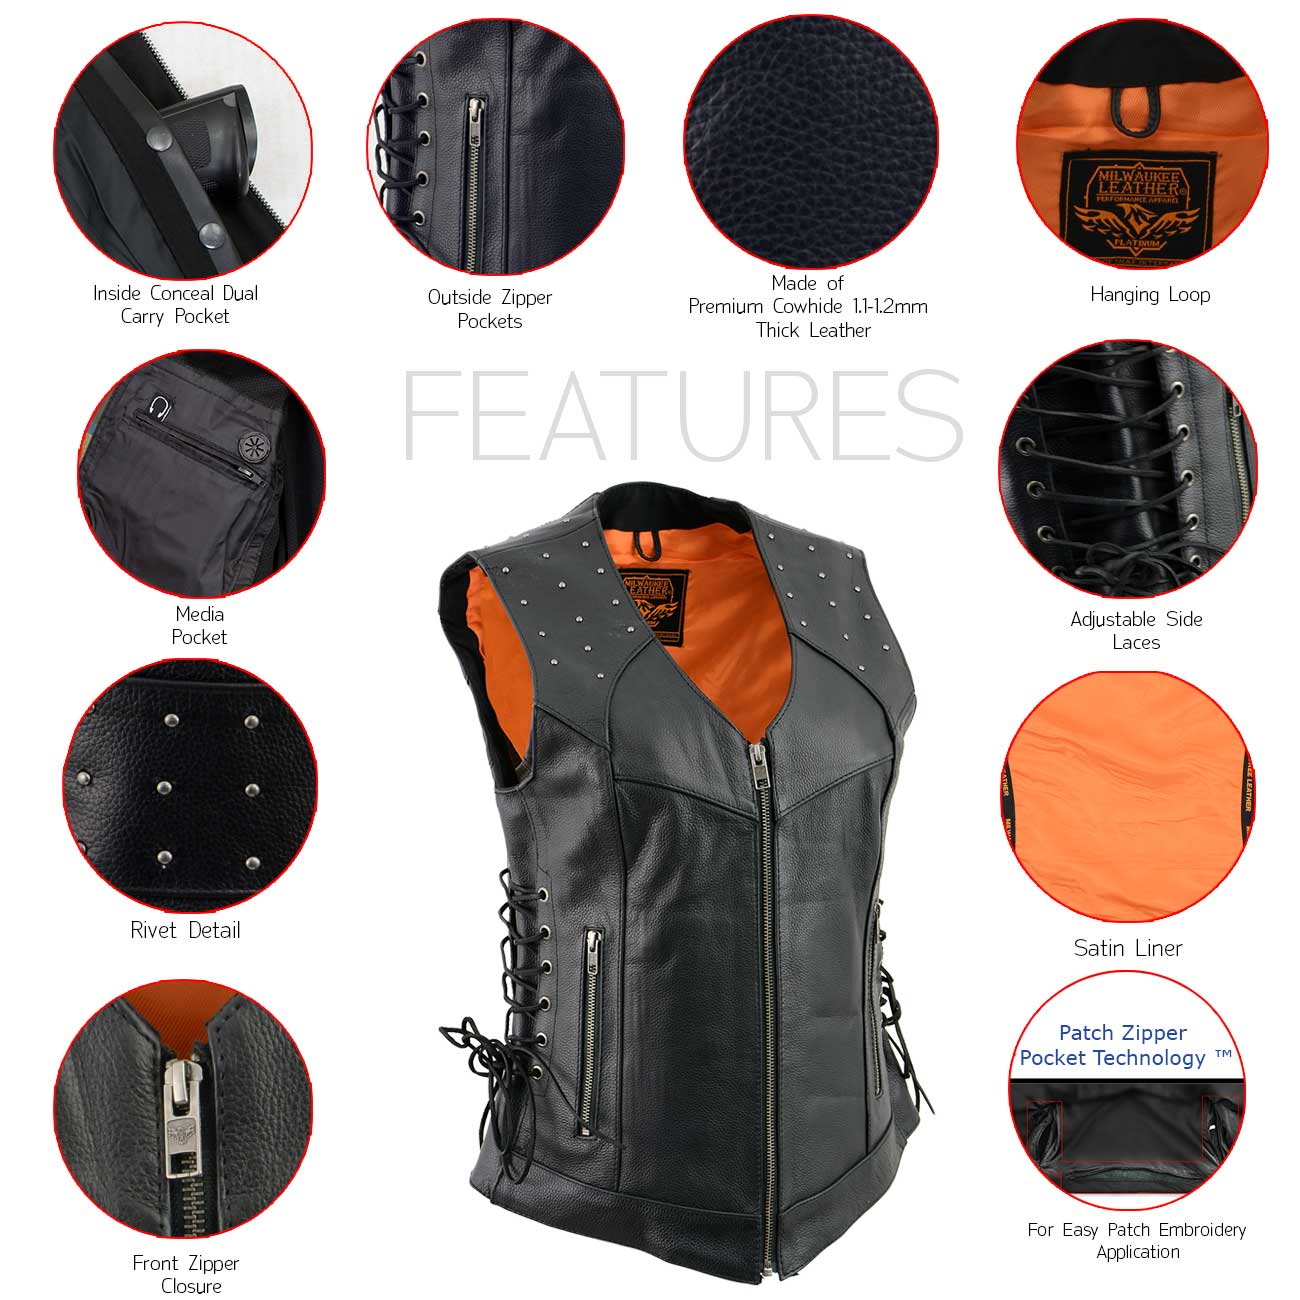 Milwaukee Leather MLL4504 Women's Classic Black Leather V-Neck Riveted Motorcycle Rider Vest with Side Lace